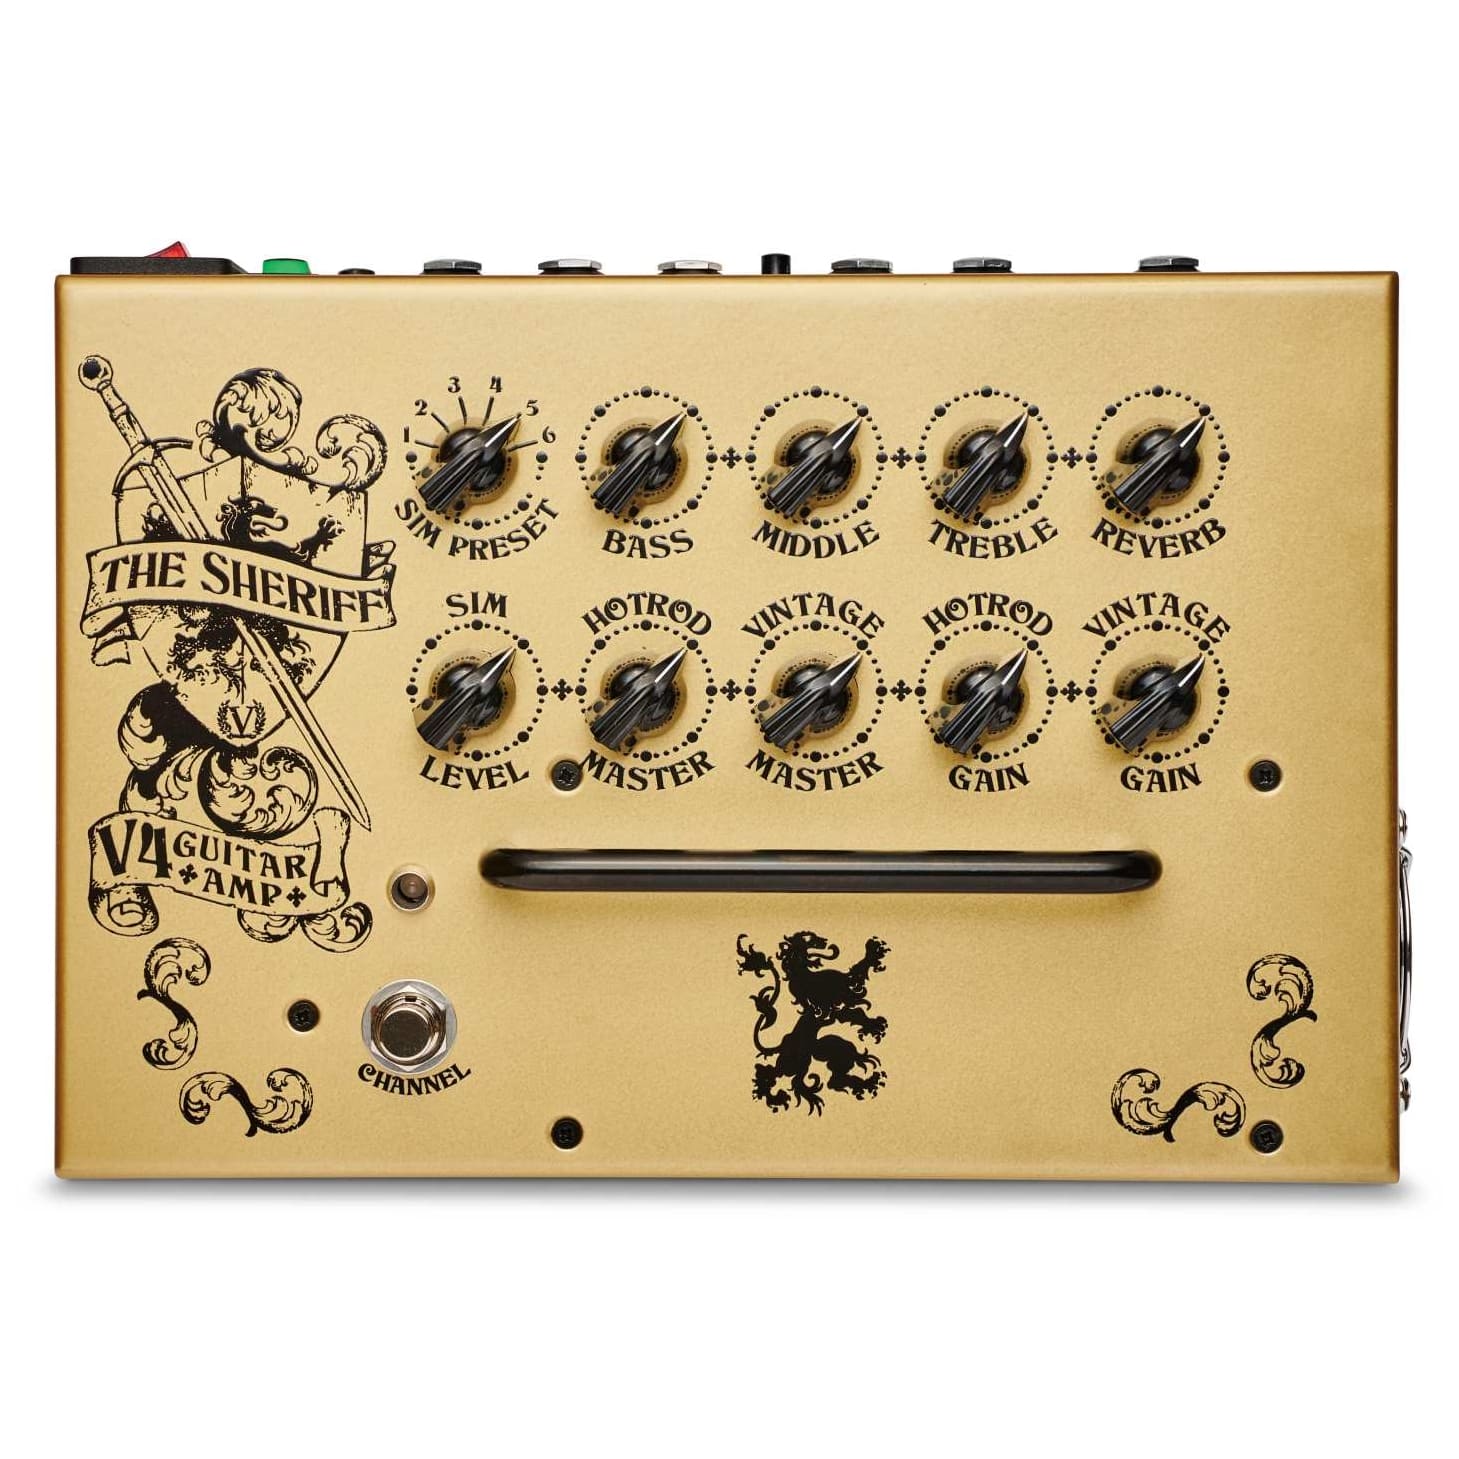 Victory Amps V4 Sheriff Power Amp TN-HP